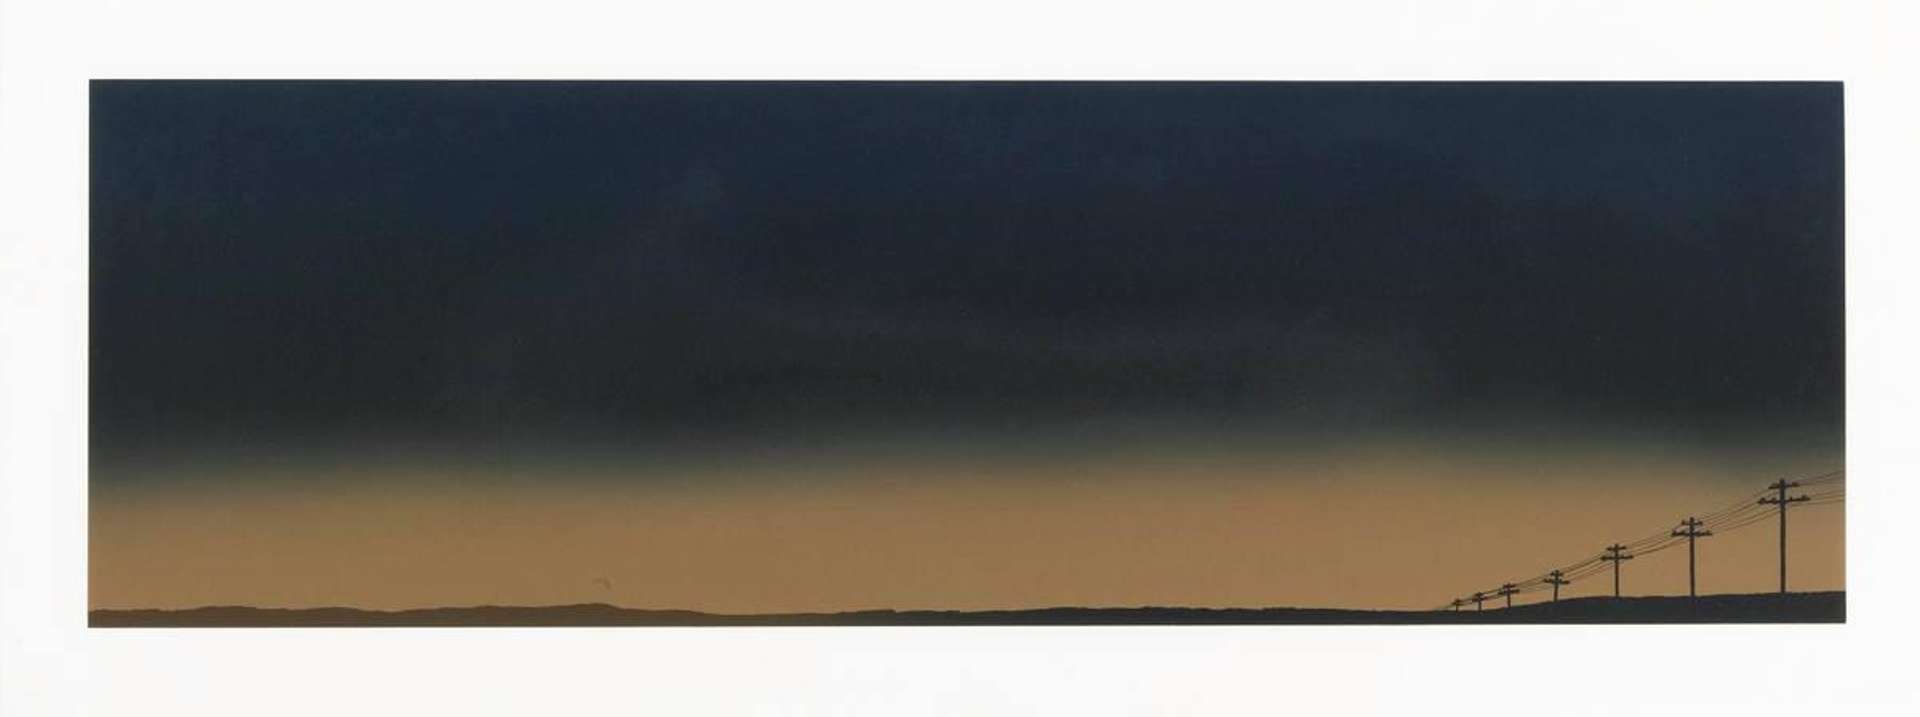 Ed Ruscha: Let's Keep In Touch - Signed Print